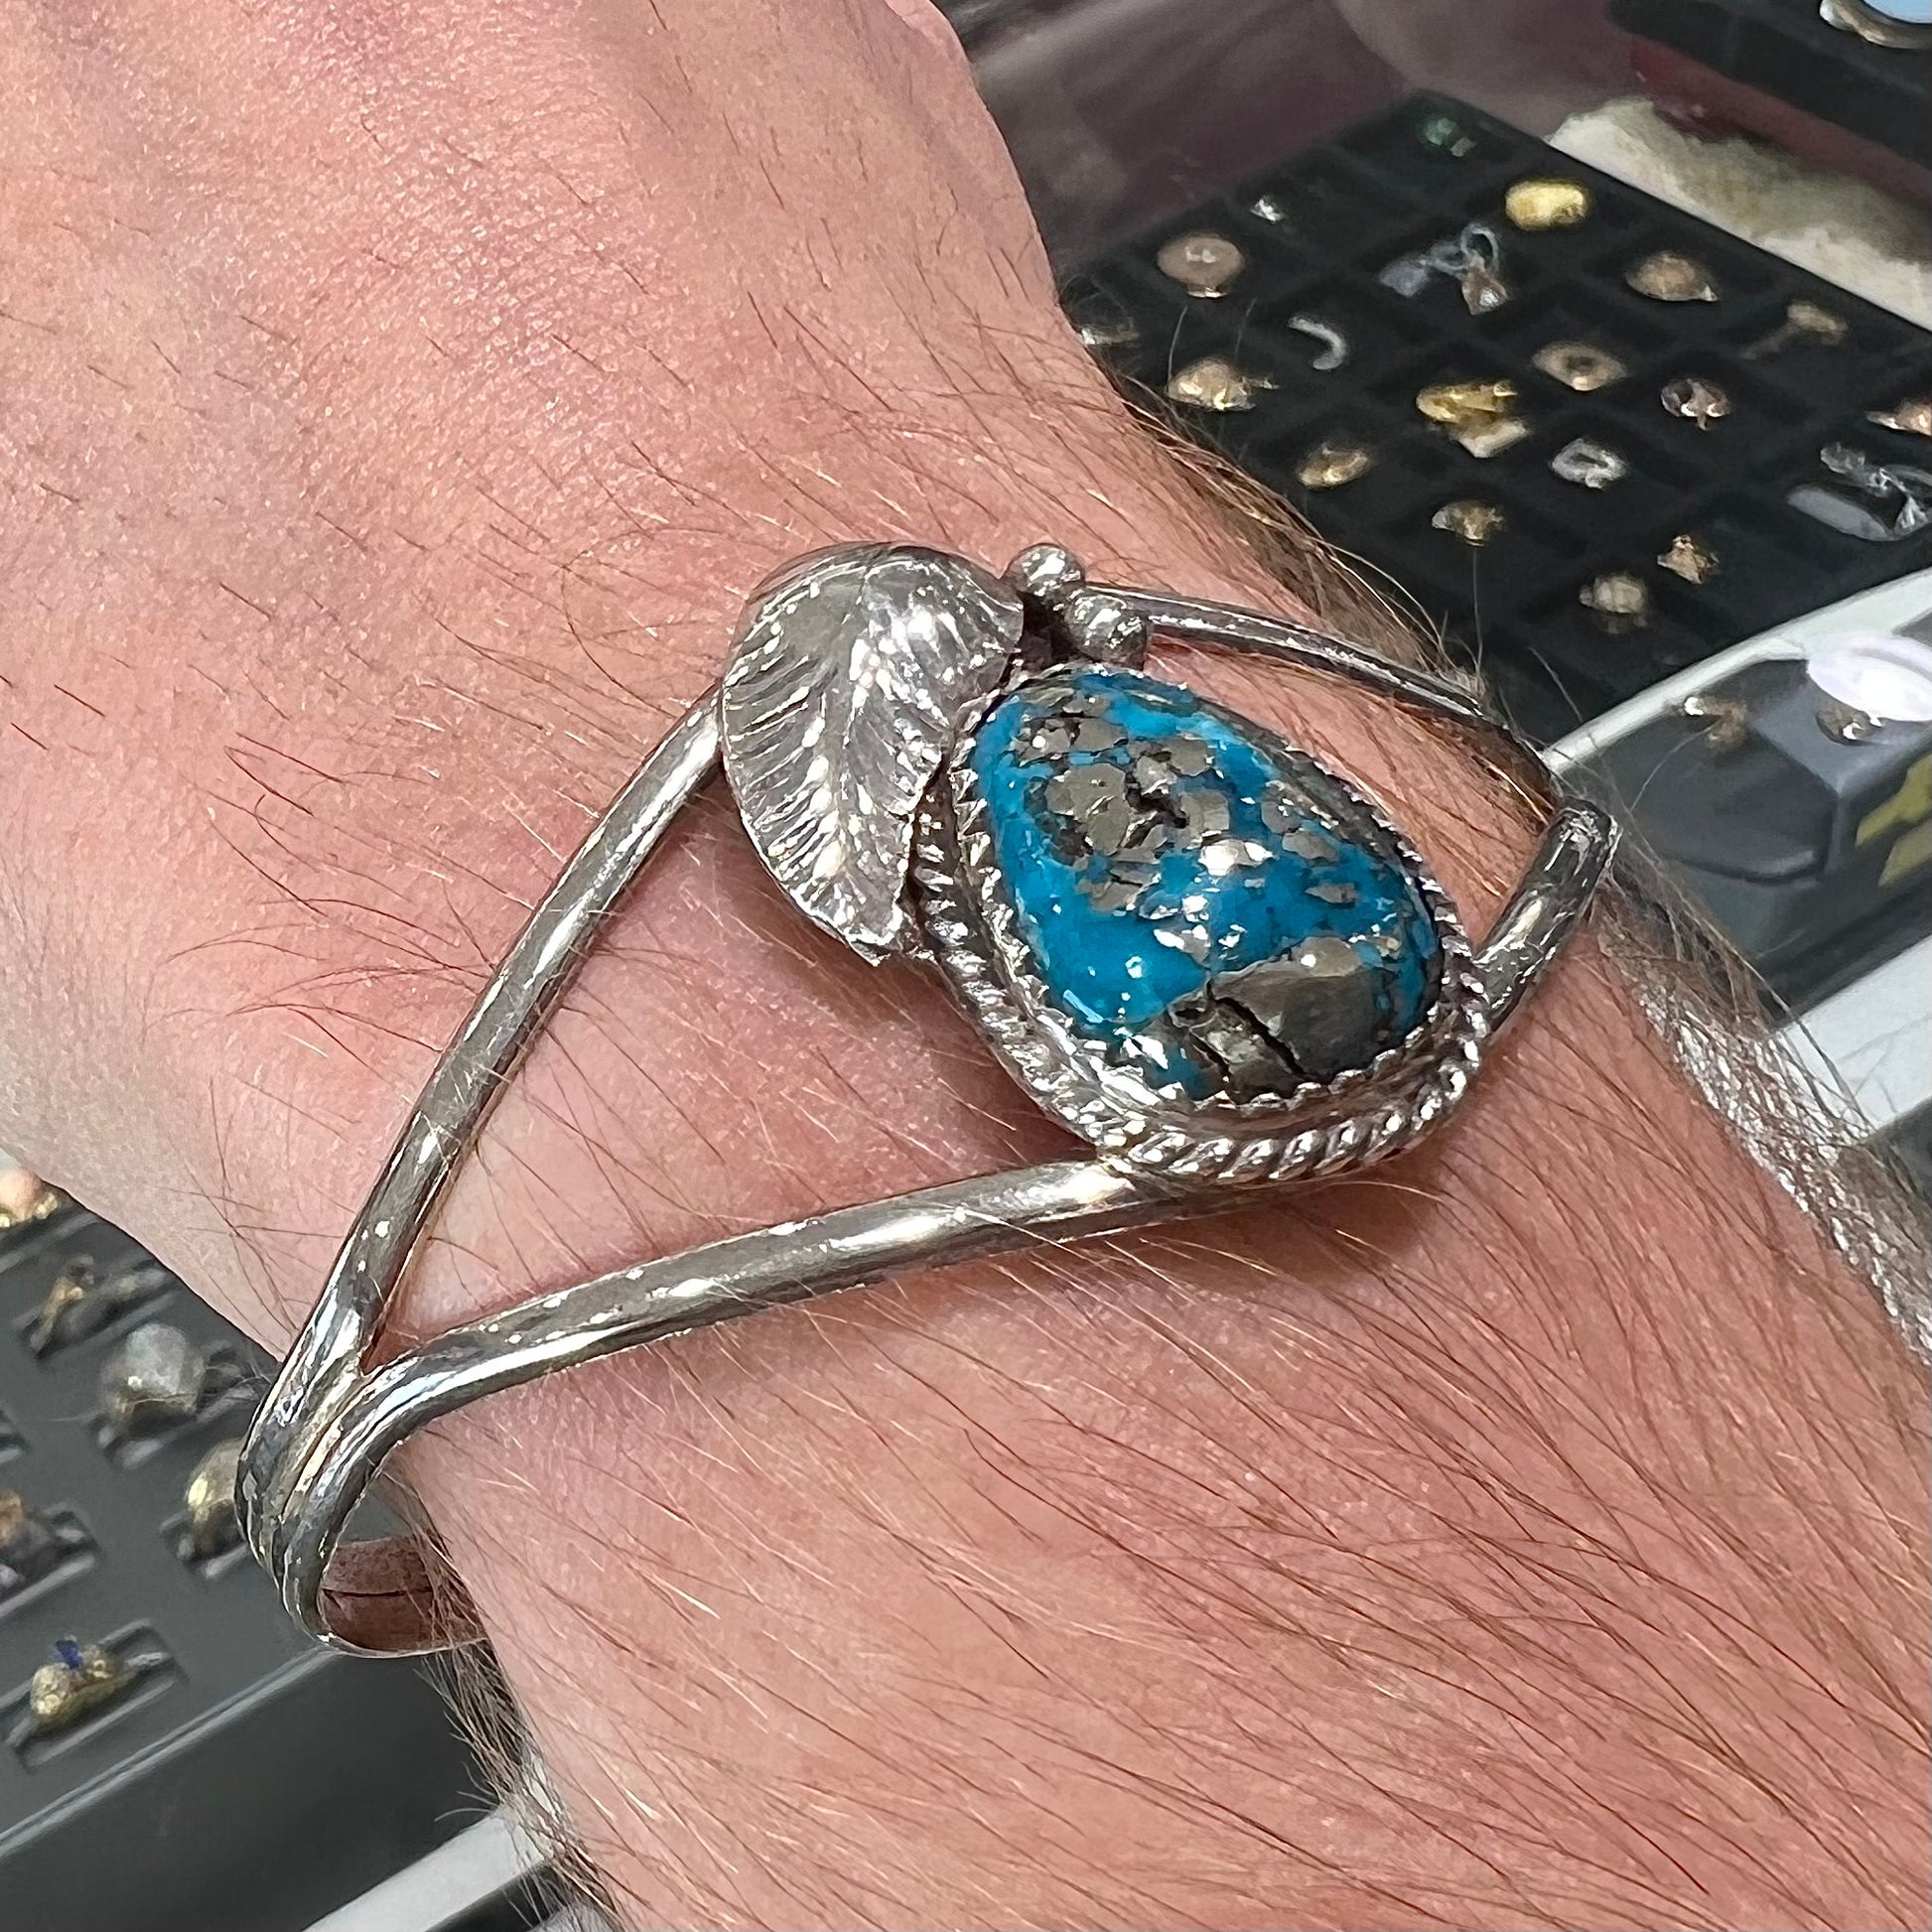 A ladies' silver Navajo cuff bracelet set with a piece of Morenci turquoise stone.